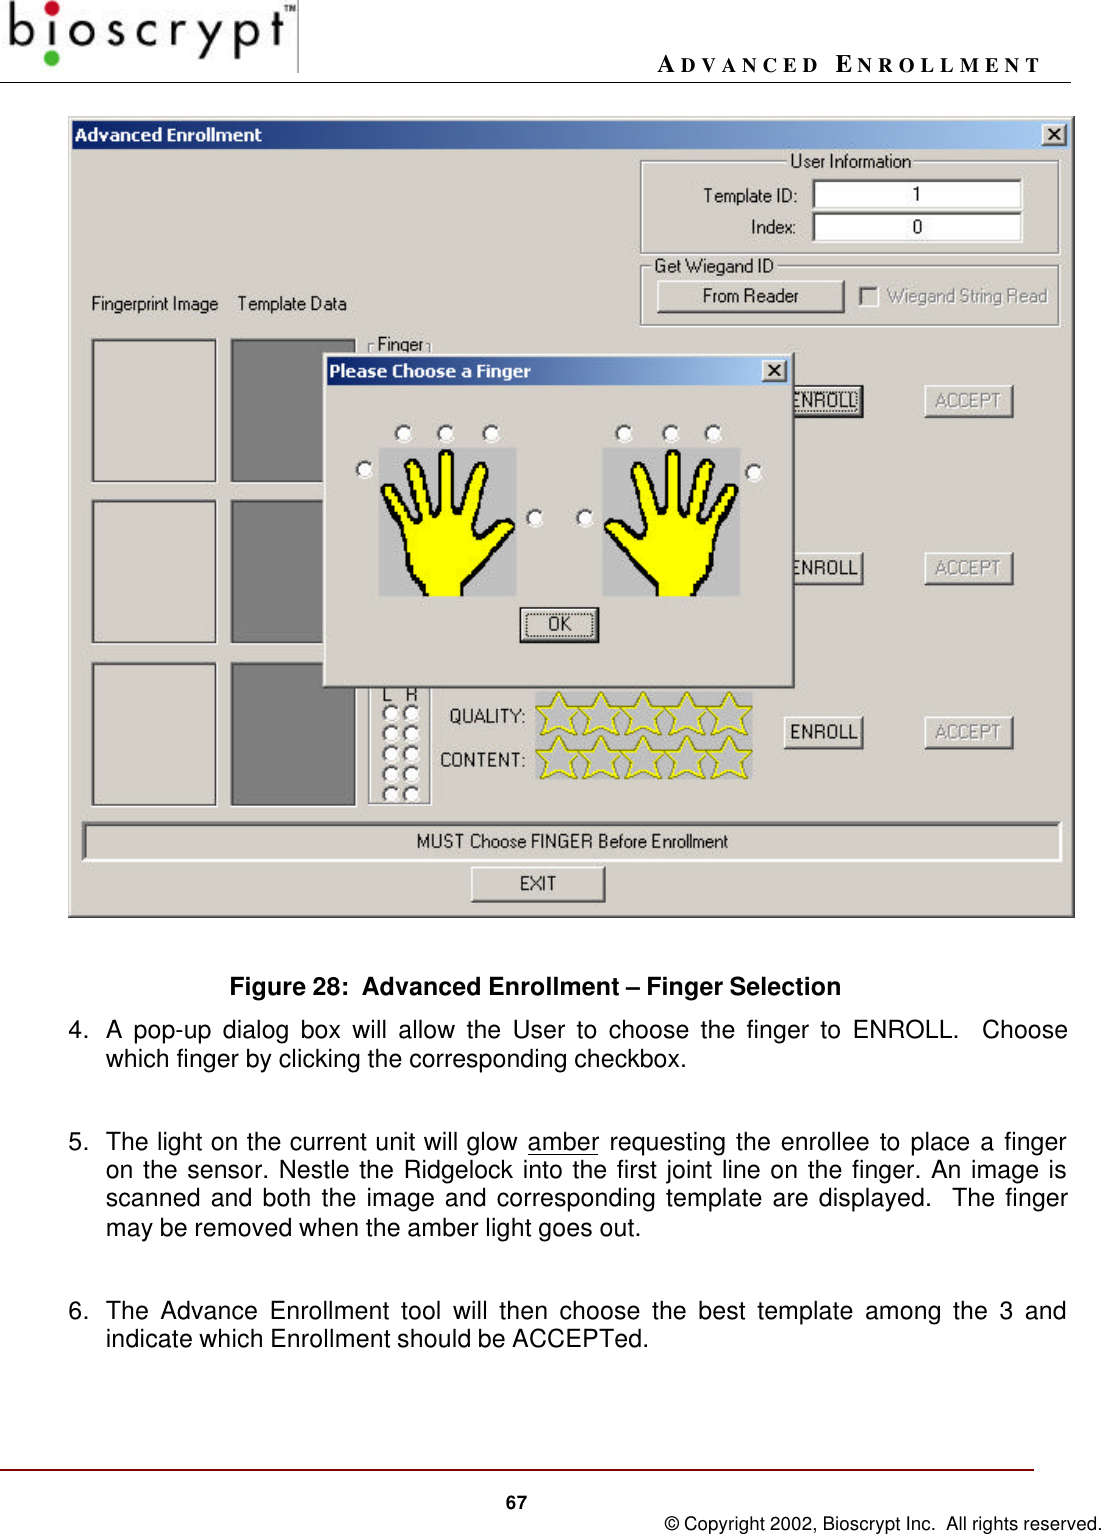 ADVANCED ENROLLMENT67 © Copyright 2002, Bioscrypt Inc.  All rights reserved.Figure 28:  Advanced Enrollment – Finger Selection4. A pop-up dialog box will allow the User to choose the finger to ENROLL.  Choosewhich finger by clicking the corresponding checkbox.5. The light on the current unit will glow amber requesting the enrollee to place a fingeron the sensor. Nestle the Ridgelock into the first joint line on the finger. An image isscanned and both the image and corresponding template are displayed.  The fingermay be removed when the amber light goes out.6. The Advance Enrollment tool will then choose the best template among the 3 andindicate which Enrollment should be ACCEPTed.